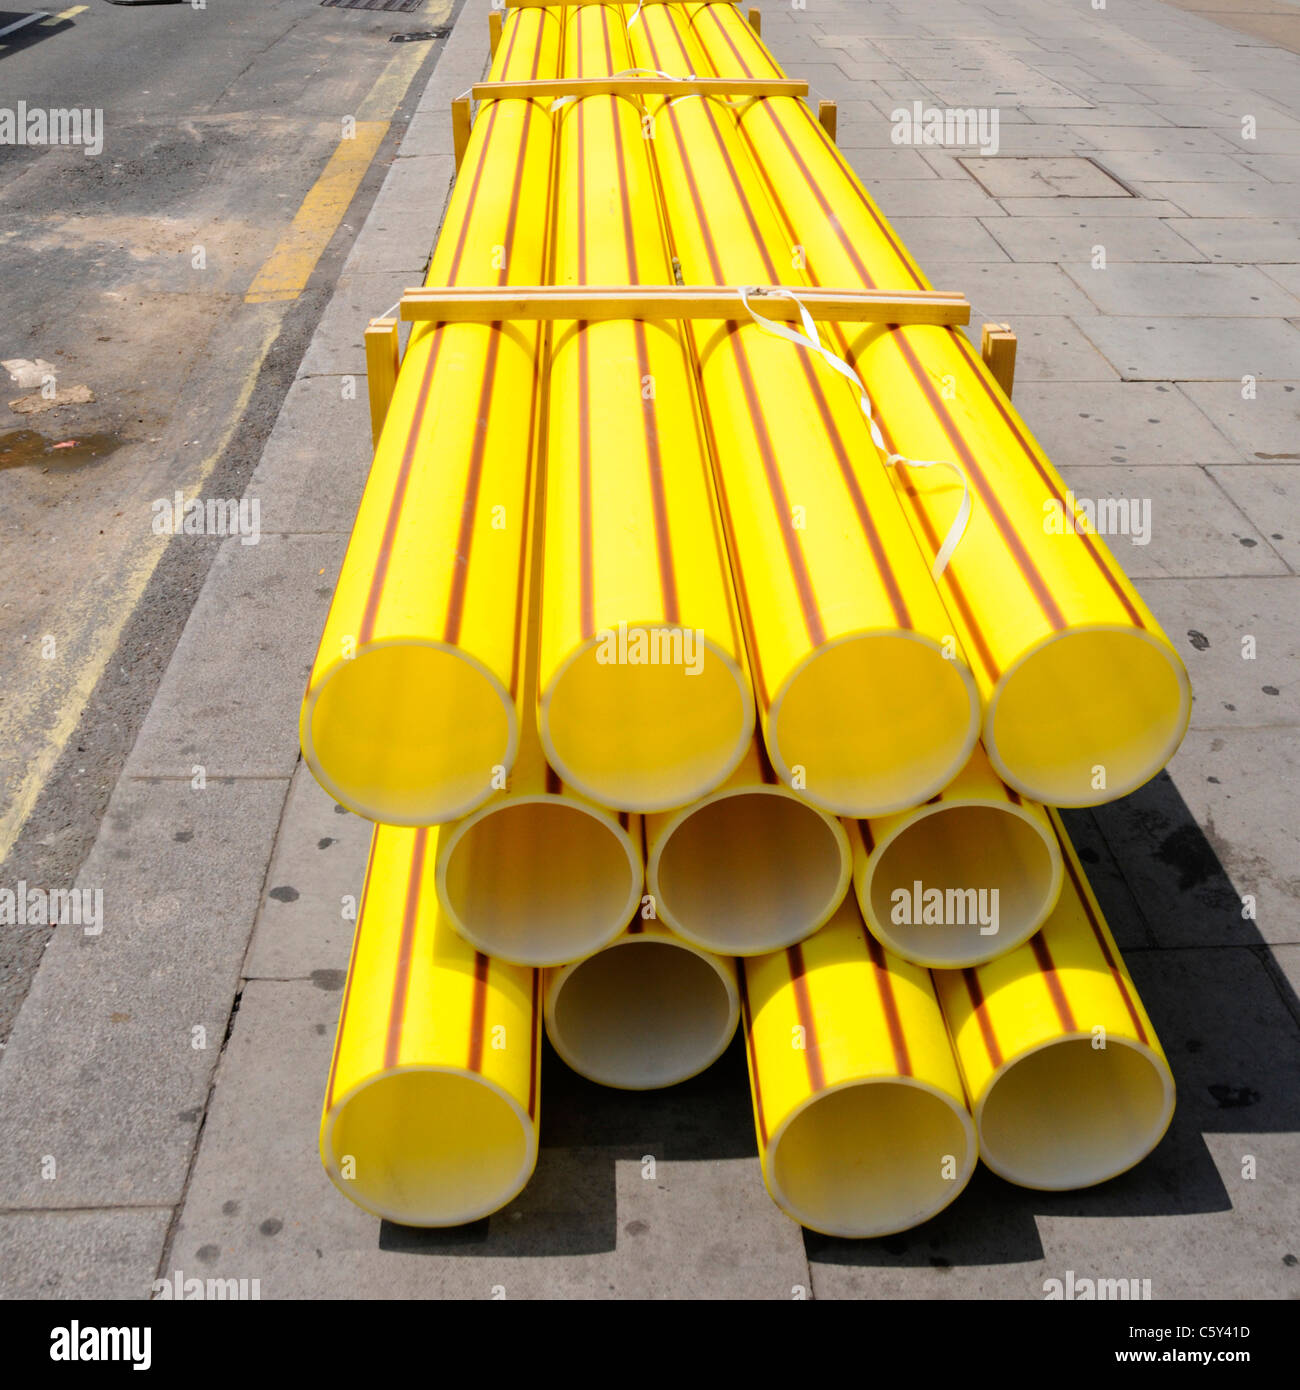 Infrastructure maintenance yellow plastic gas main pipe stacked on pavement to replace aging cast iron underground pipes Victoria London England UK Stock Photo